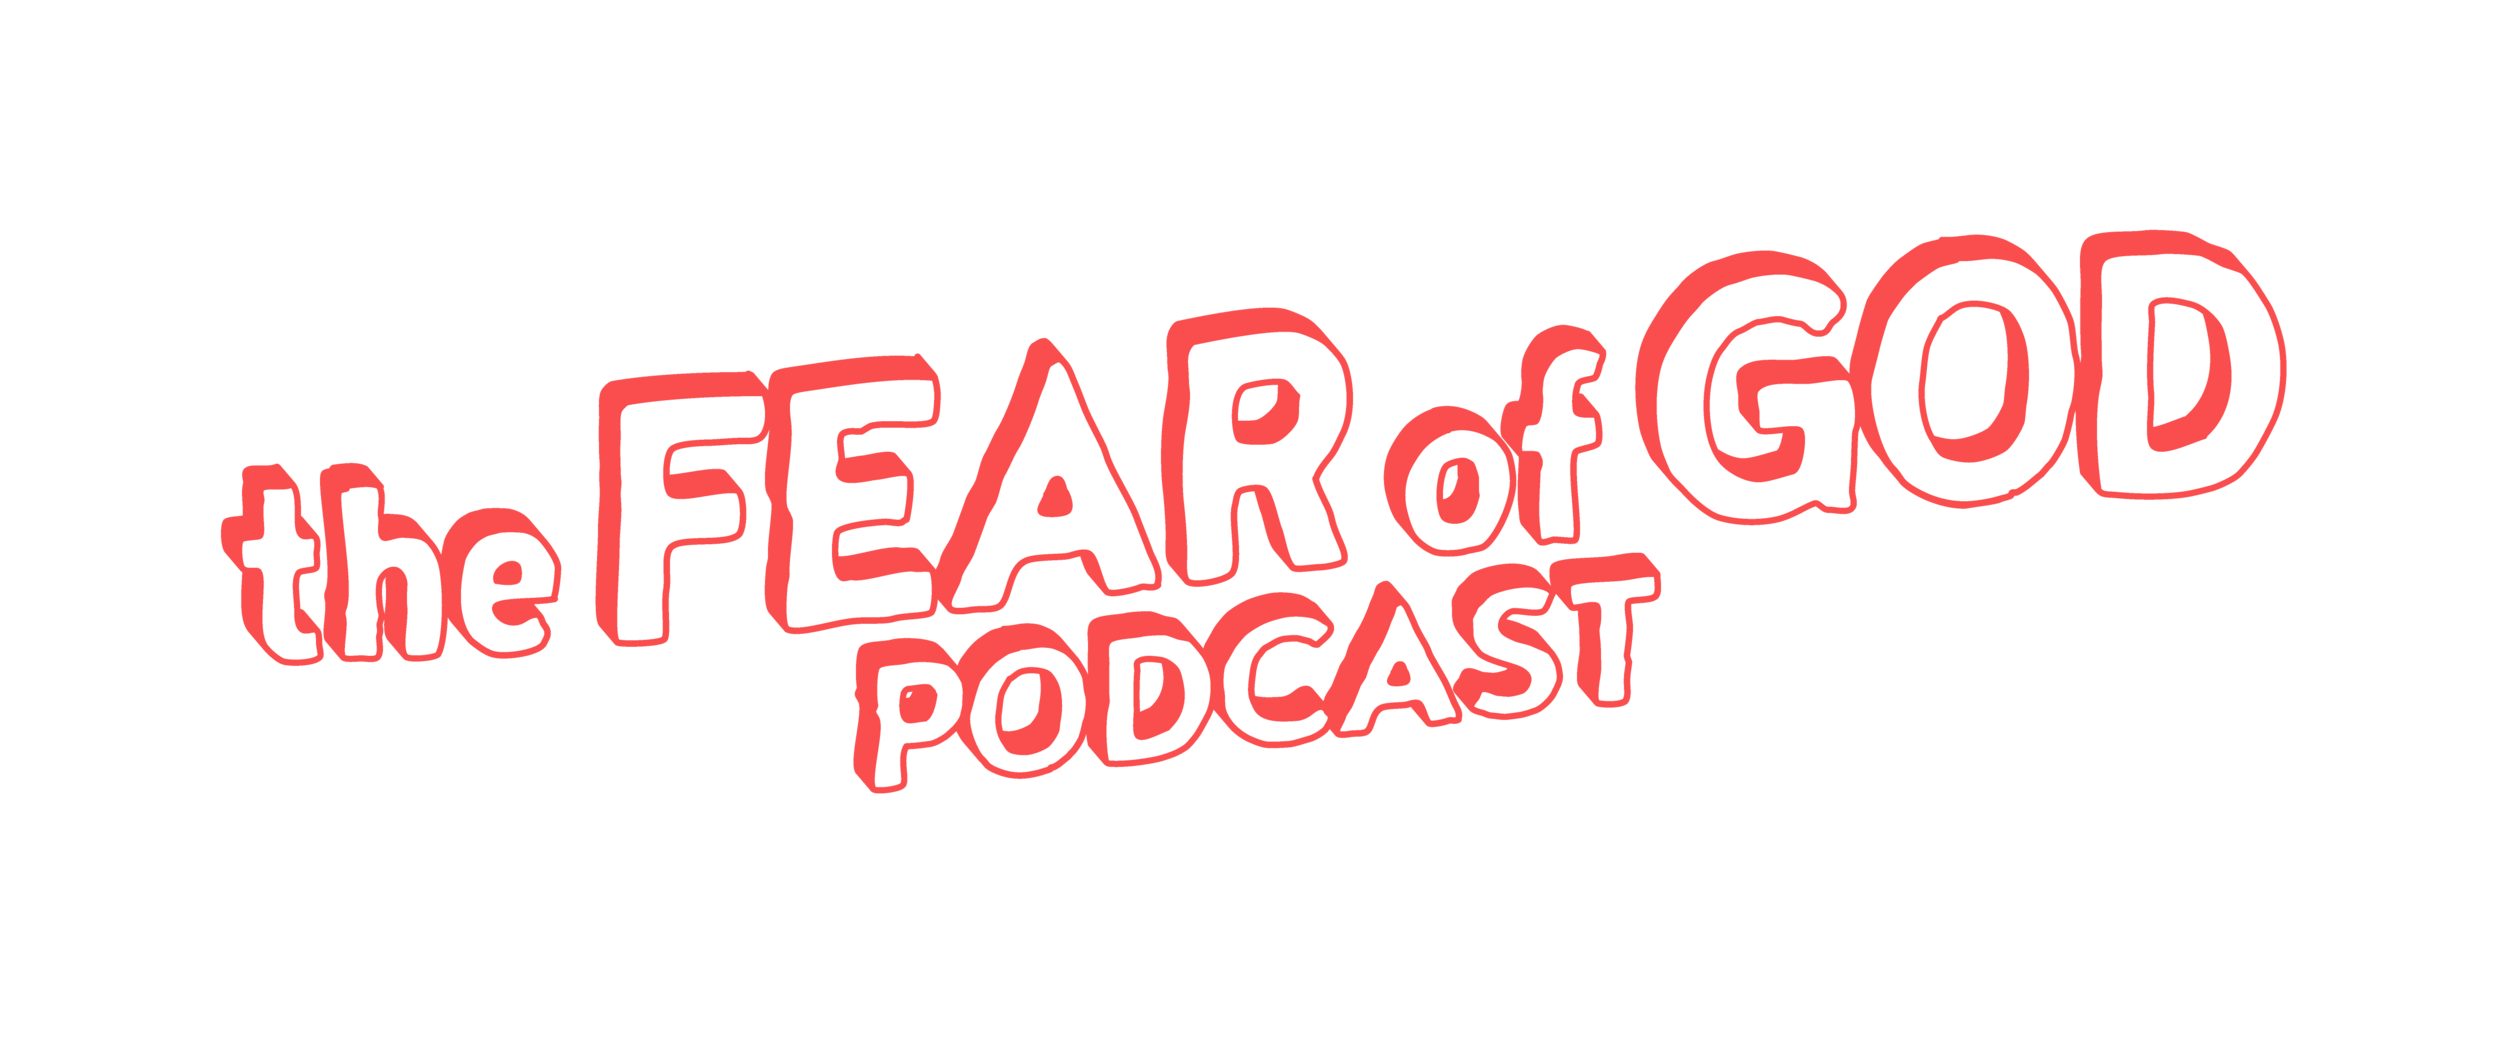 The Fear of God Podcast